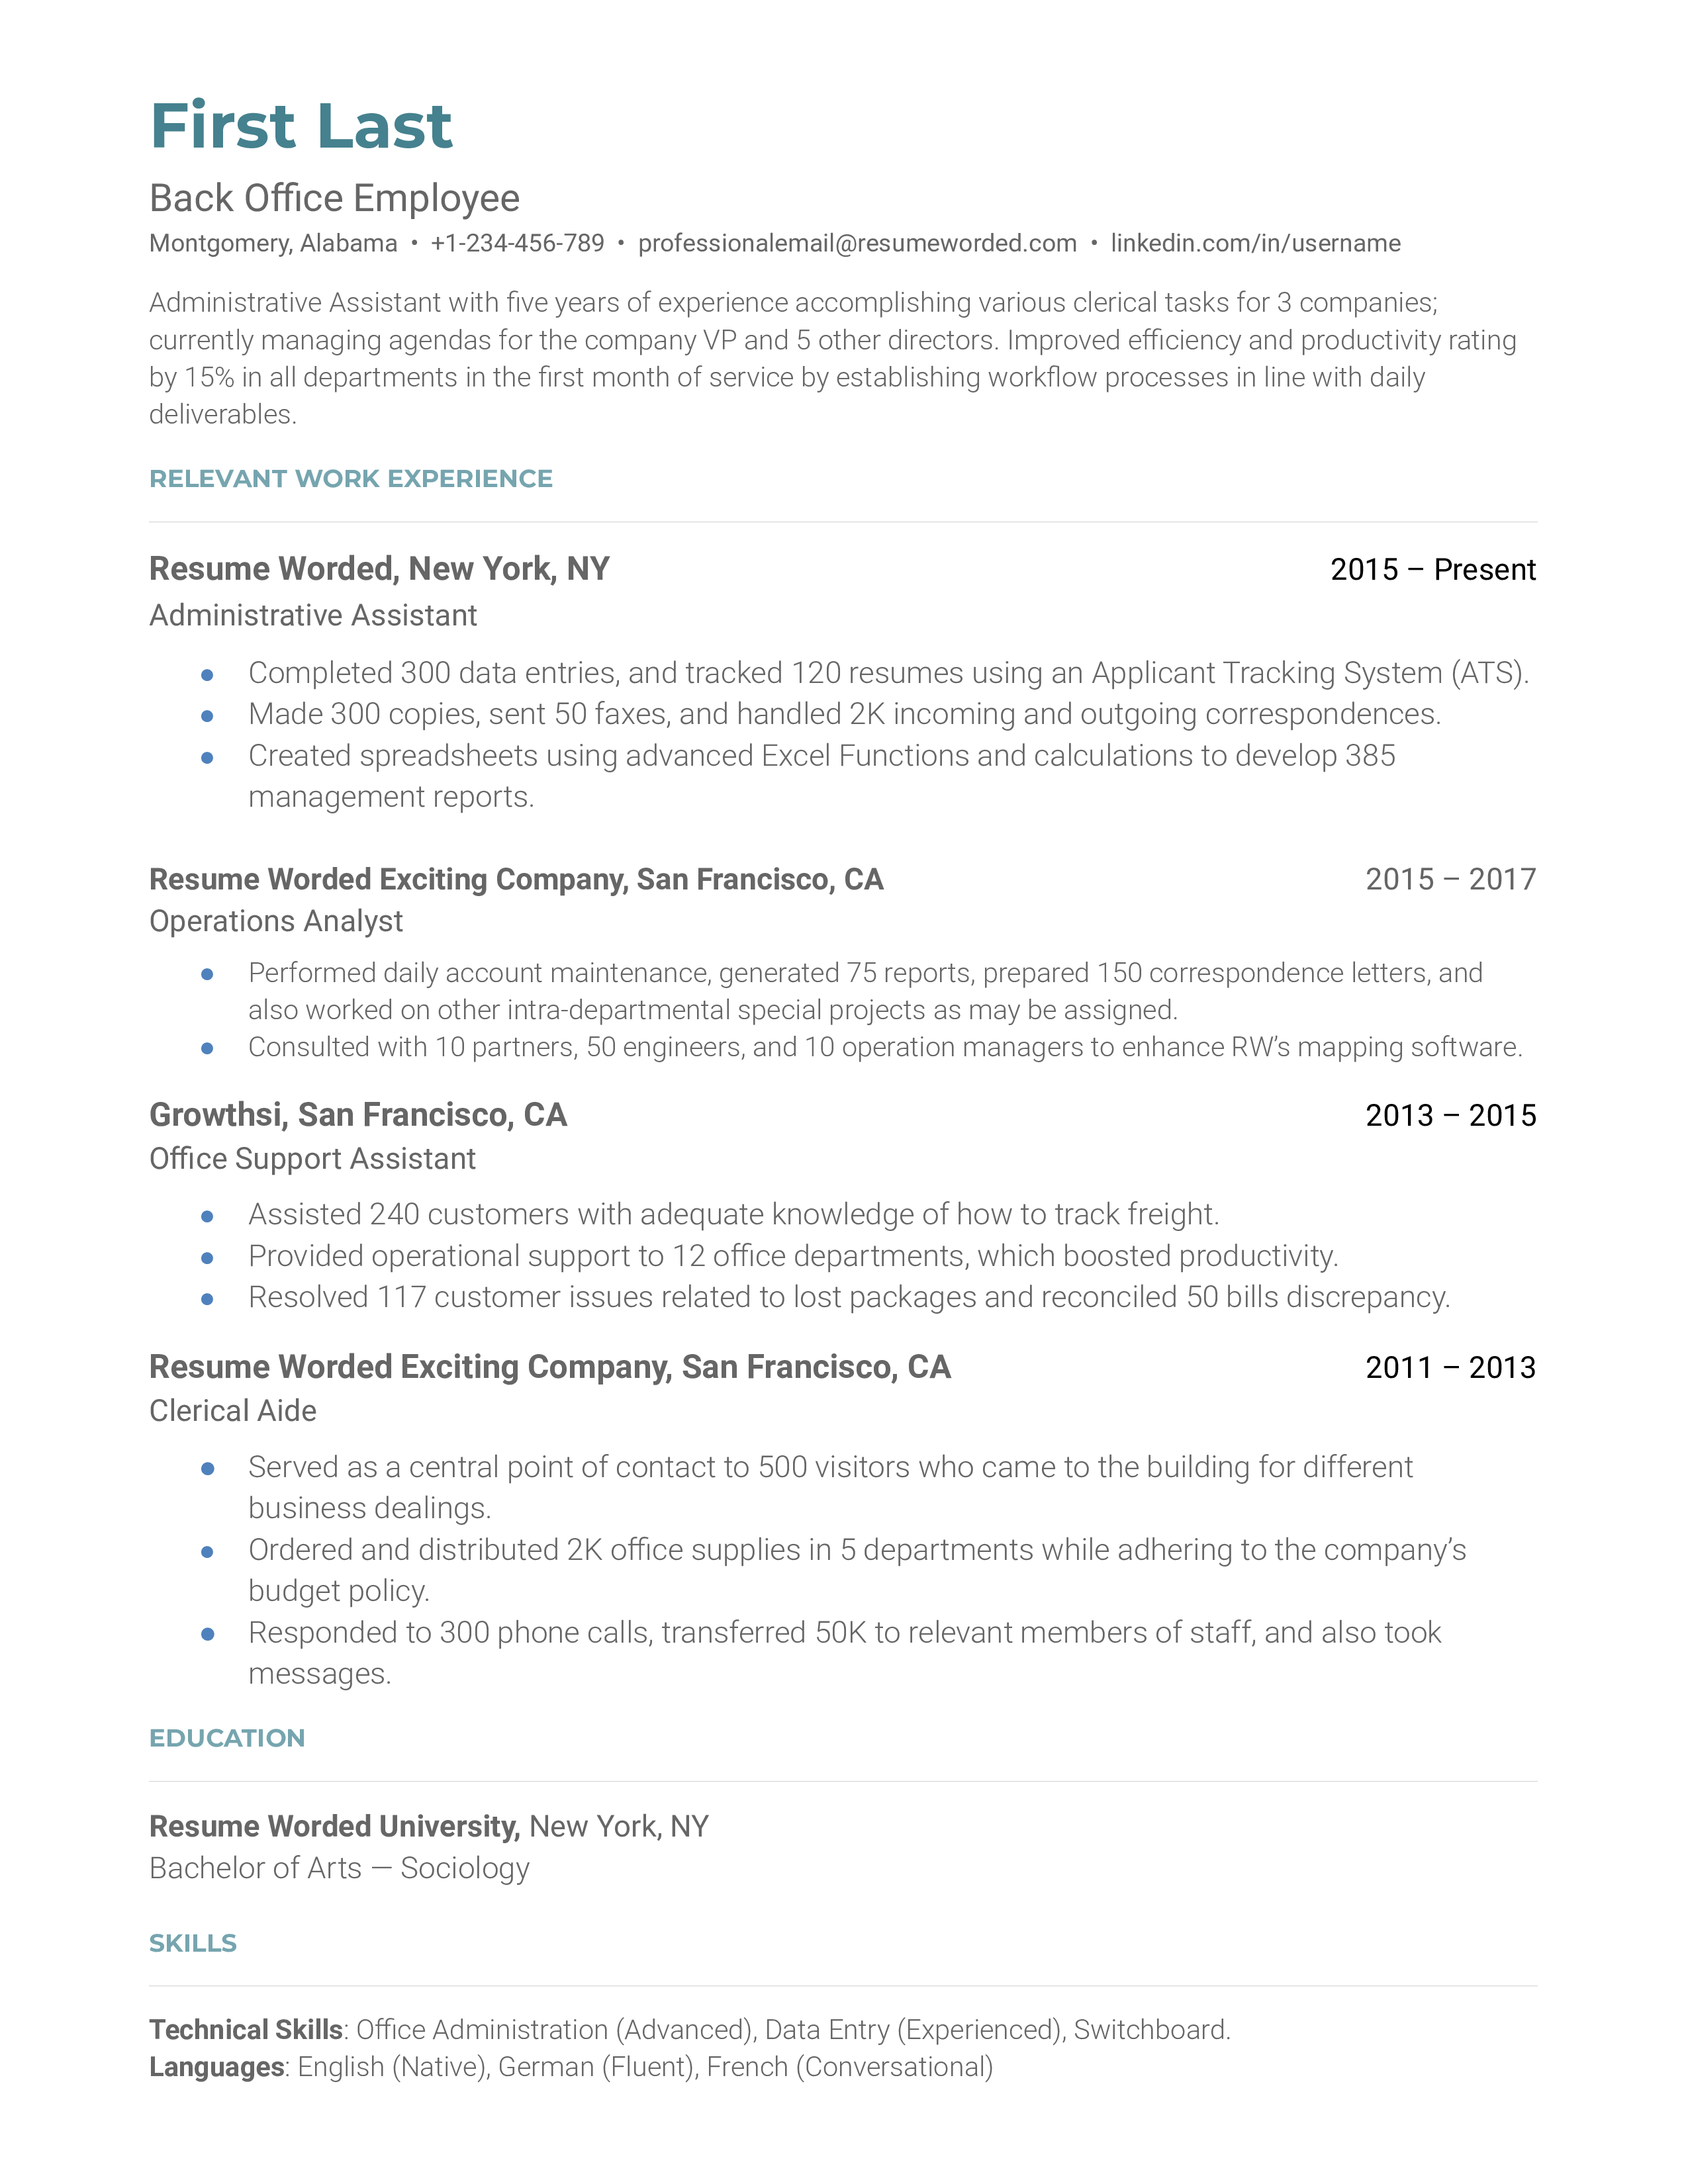 A back office employee resume showcasing an applicant's versatility in various back office tasks